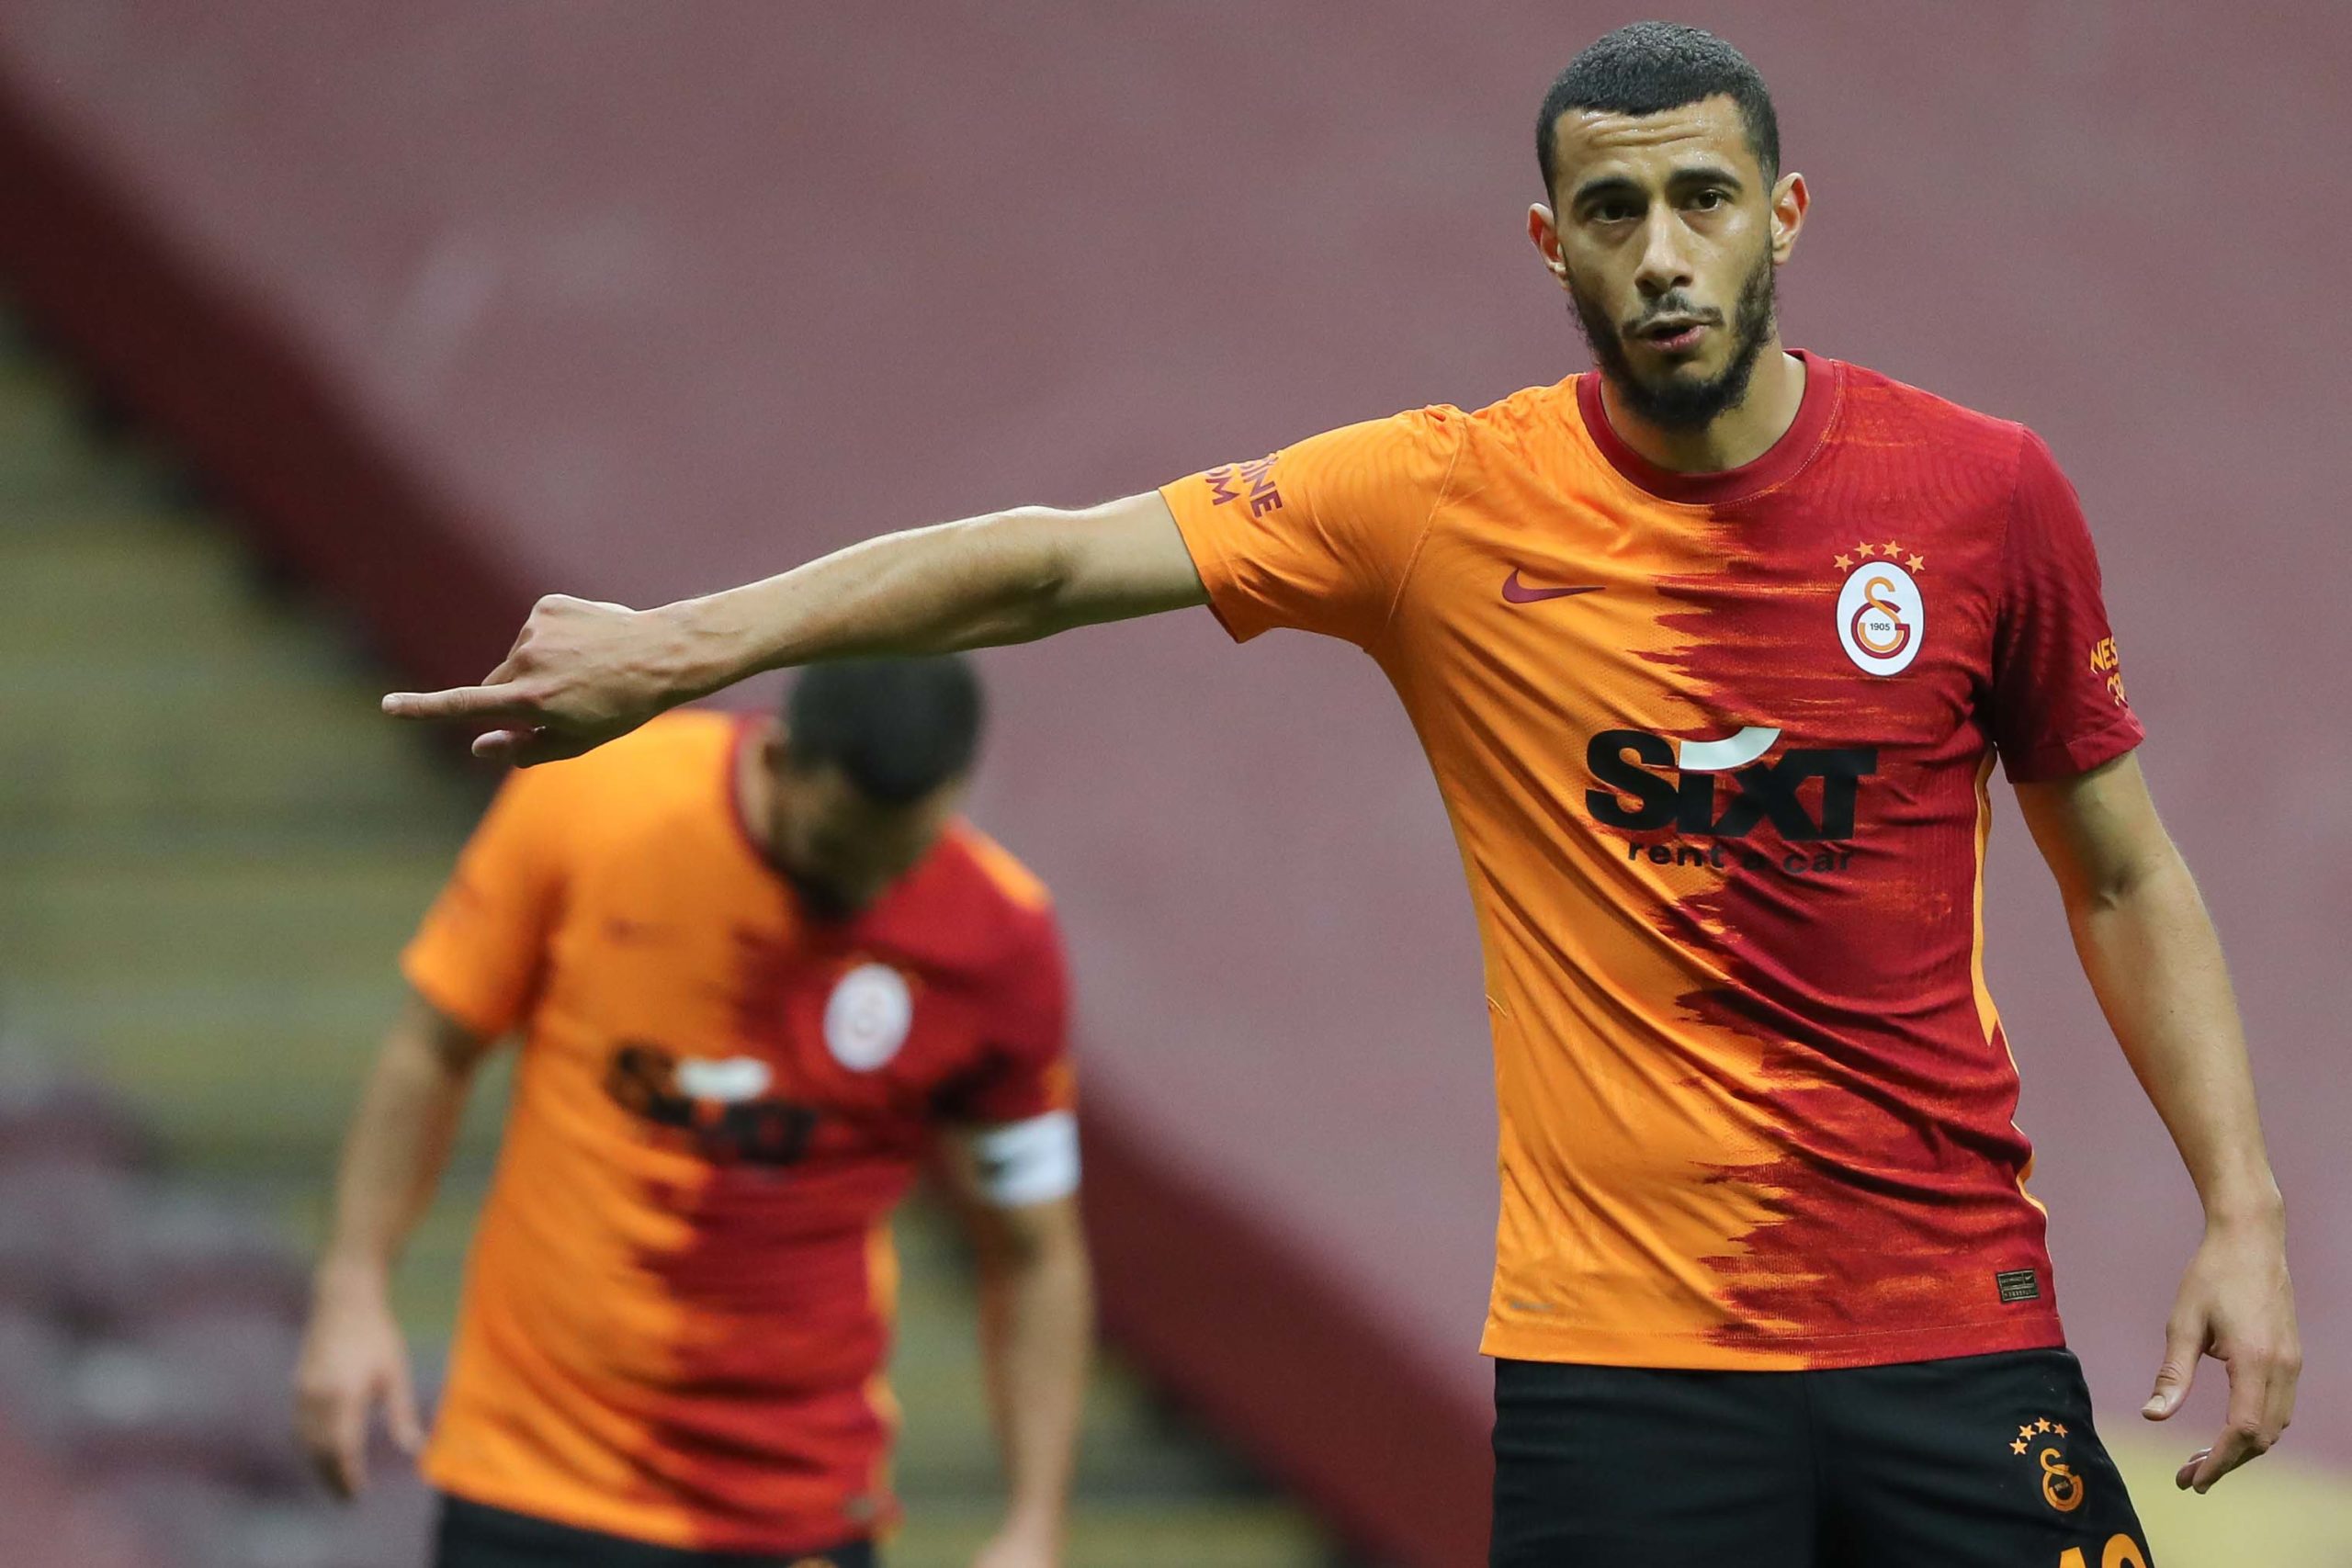 ISTANBUL, TURKEY - JANUARY 02: (BILD ZEITUNG OUT) Younes Belhanda of Galatasaray gestures during the Super Lig match between Galatasaray A.S and Antalyaspor on January 2, 2021 in Istanbul, Turkey. (Photo by Ahmad Mora/DeFodi Images via Getty Images)